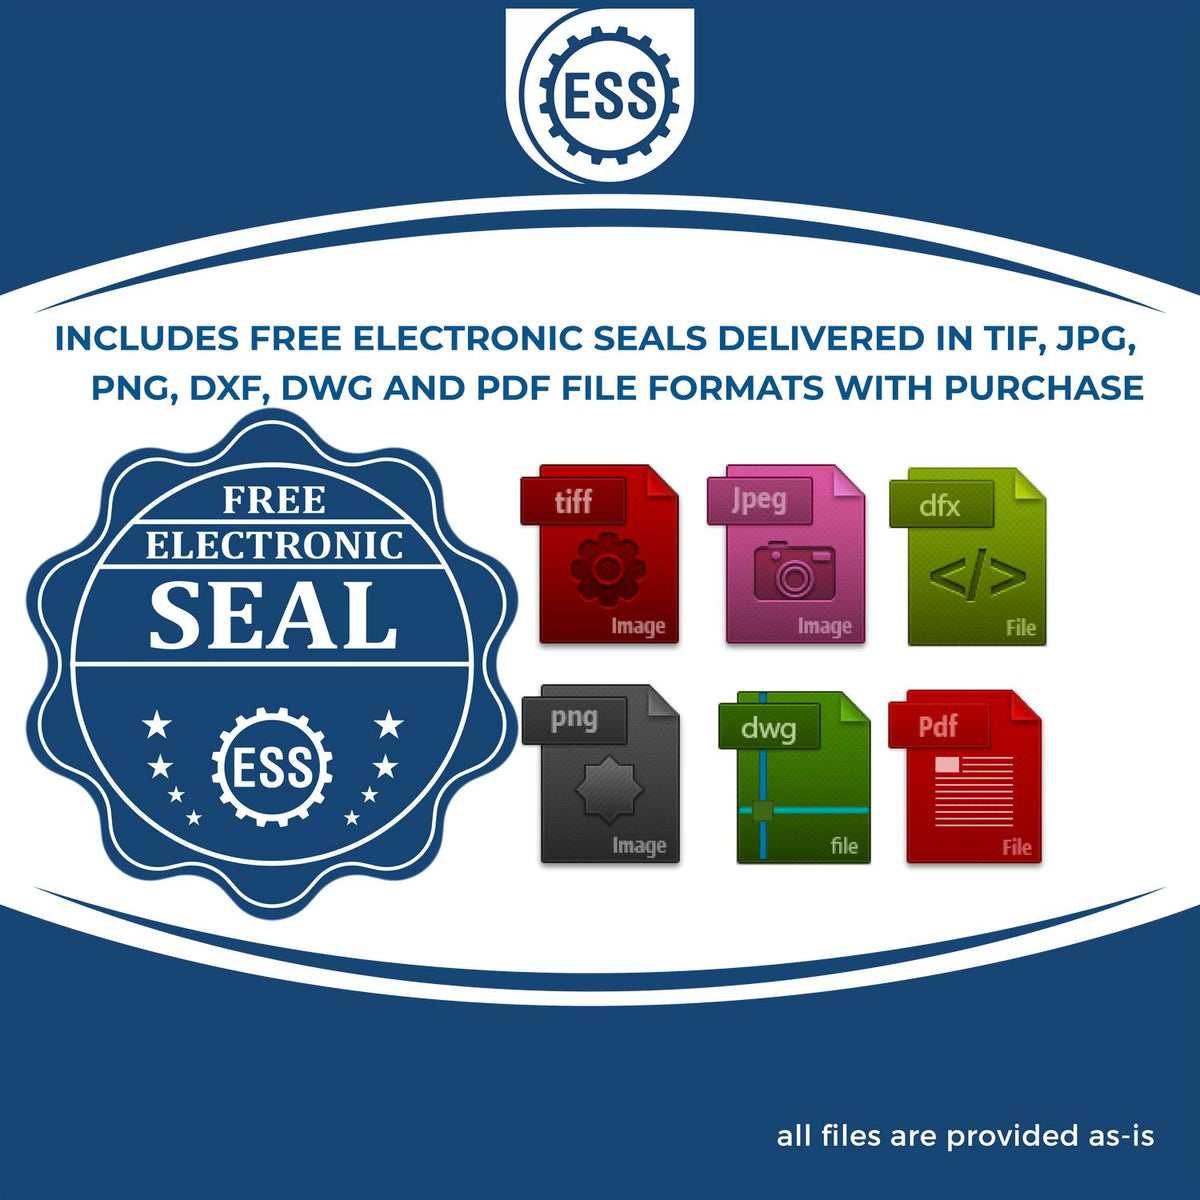 An infographic for the free electronic seal for the Self-Inking Delaware Geologist Stamp illustrating the different file type icons such as DXF, DWG, TIF, JPG and PNG.